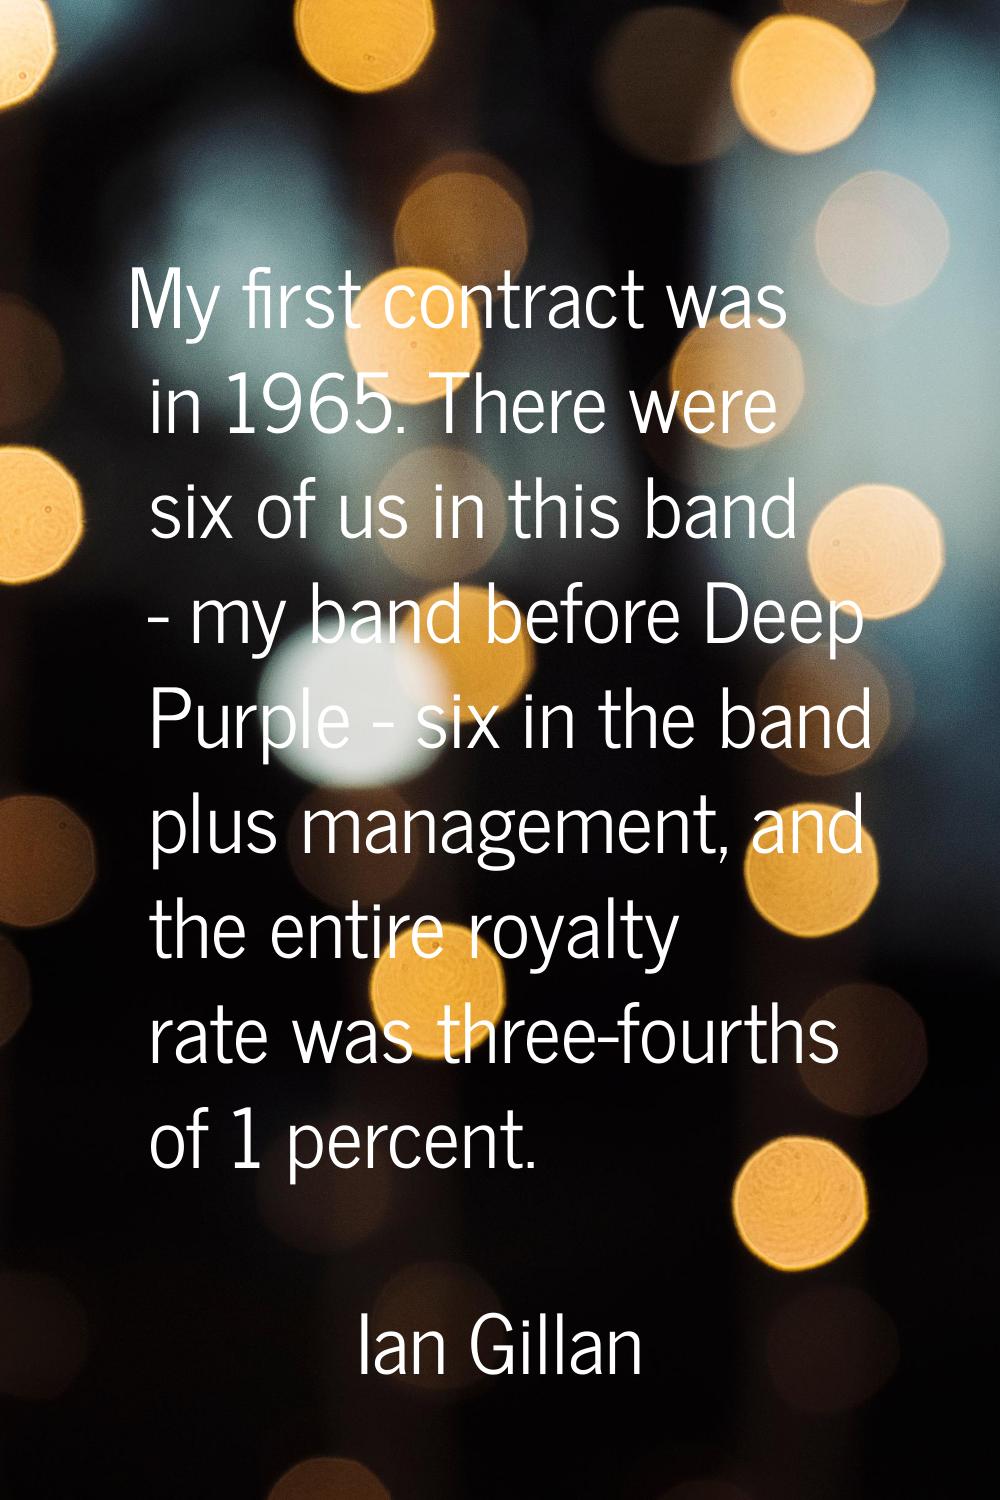 My first contract was in 1965. There were six of us in this band - my band before Deep Purple - six